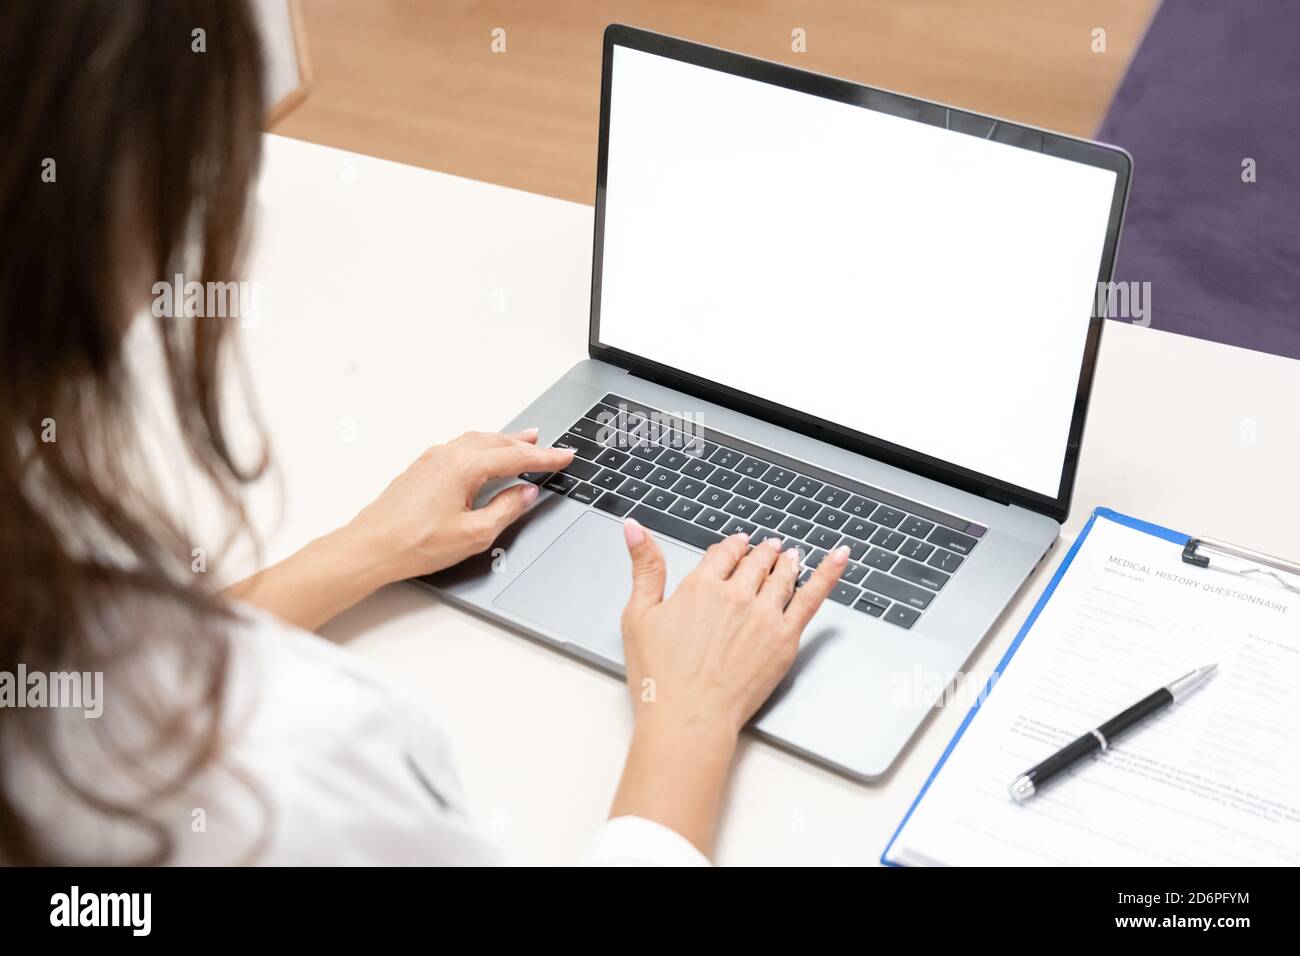 Mockup on laptop with female doctor using application on it. Stock Photo